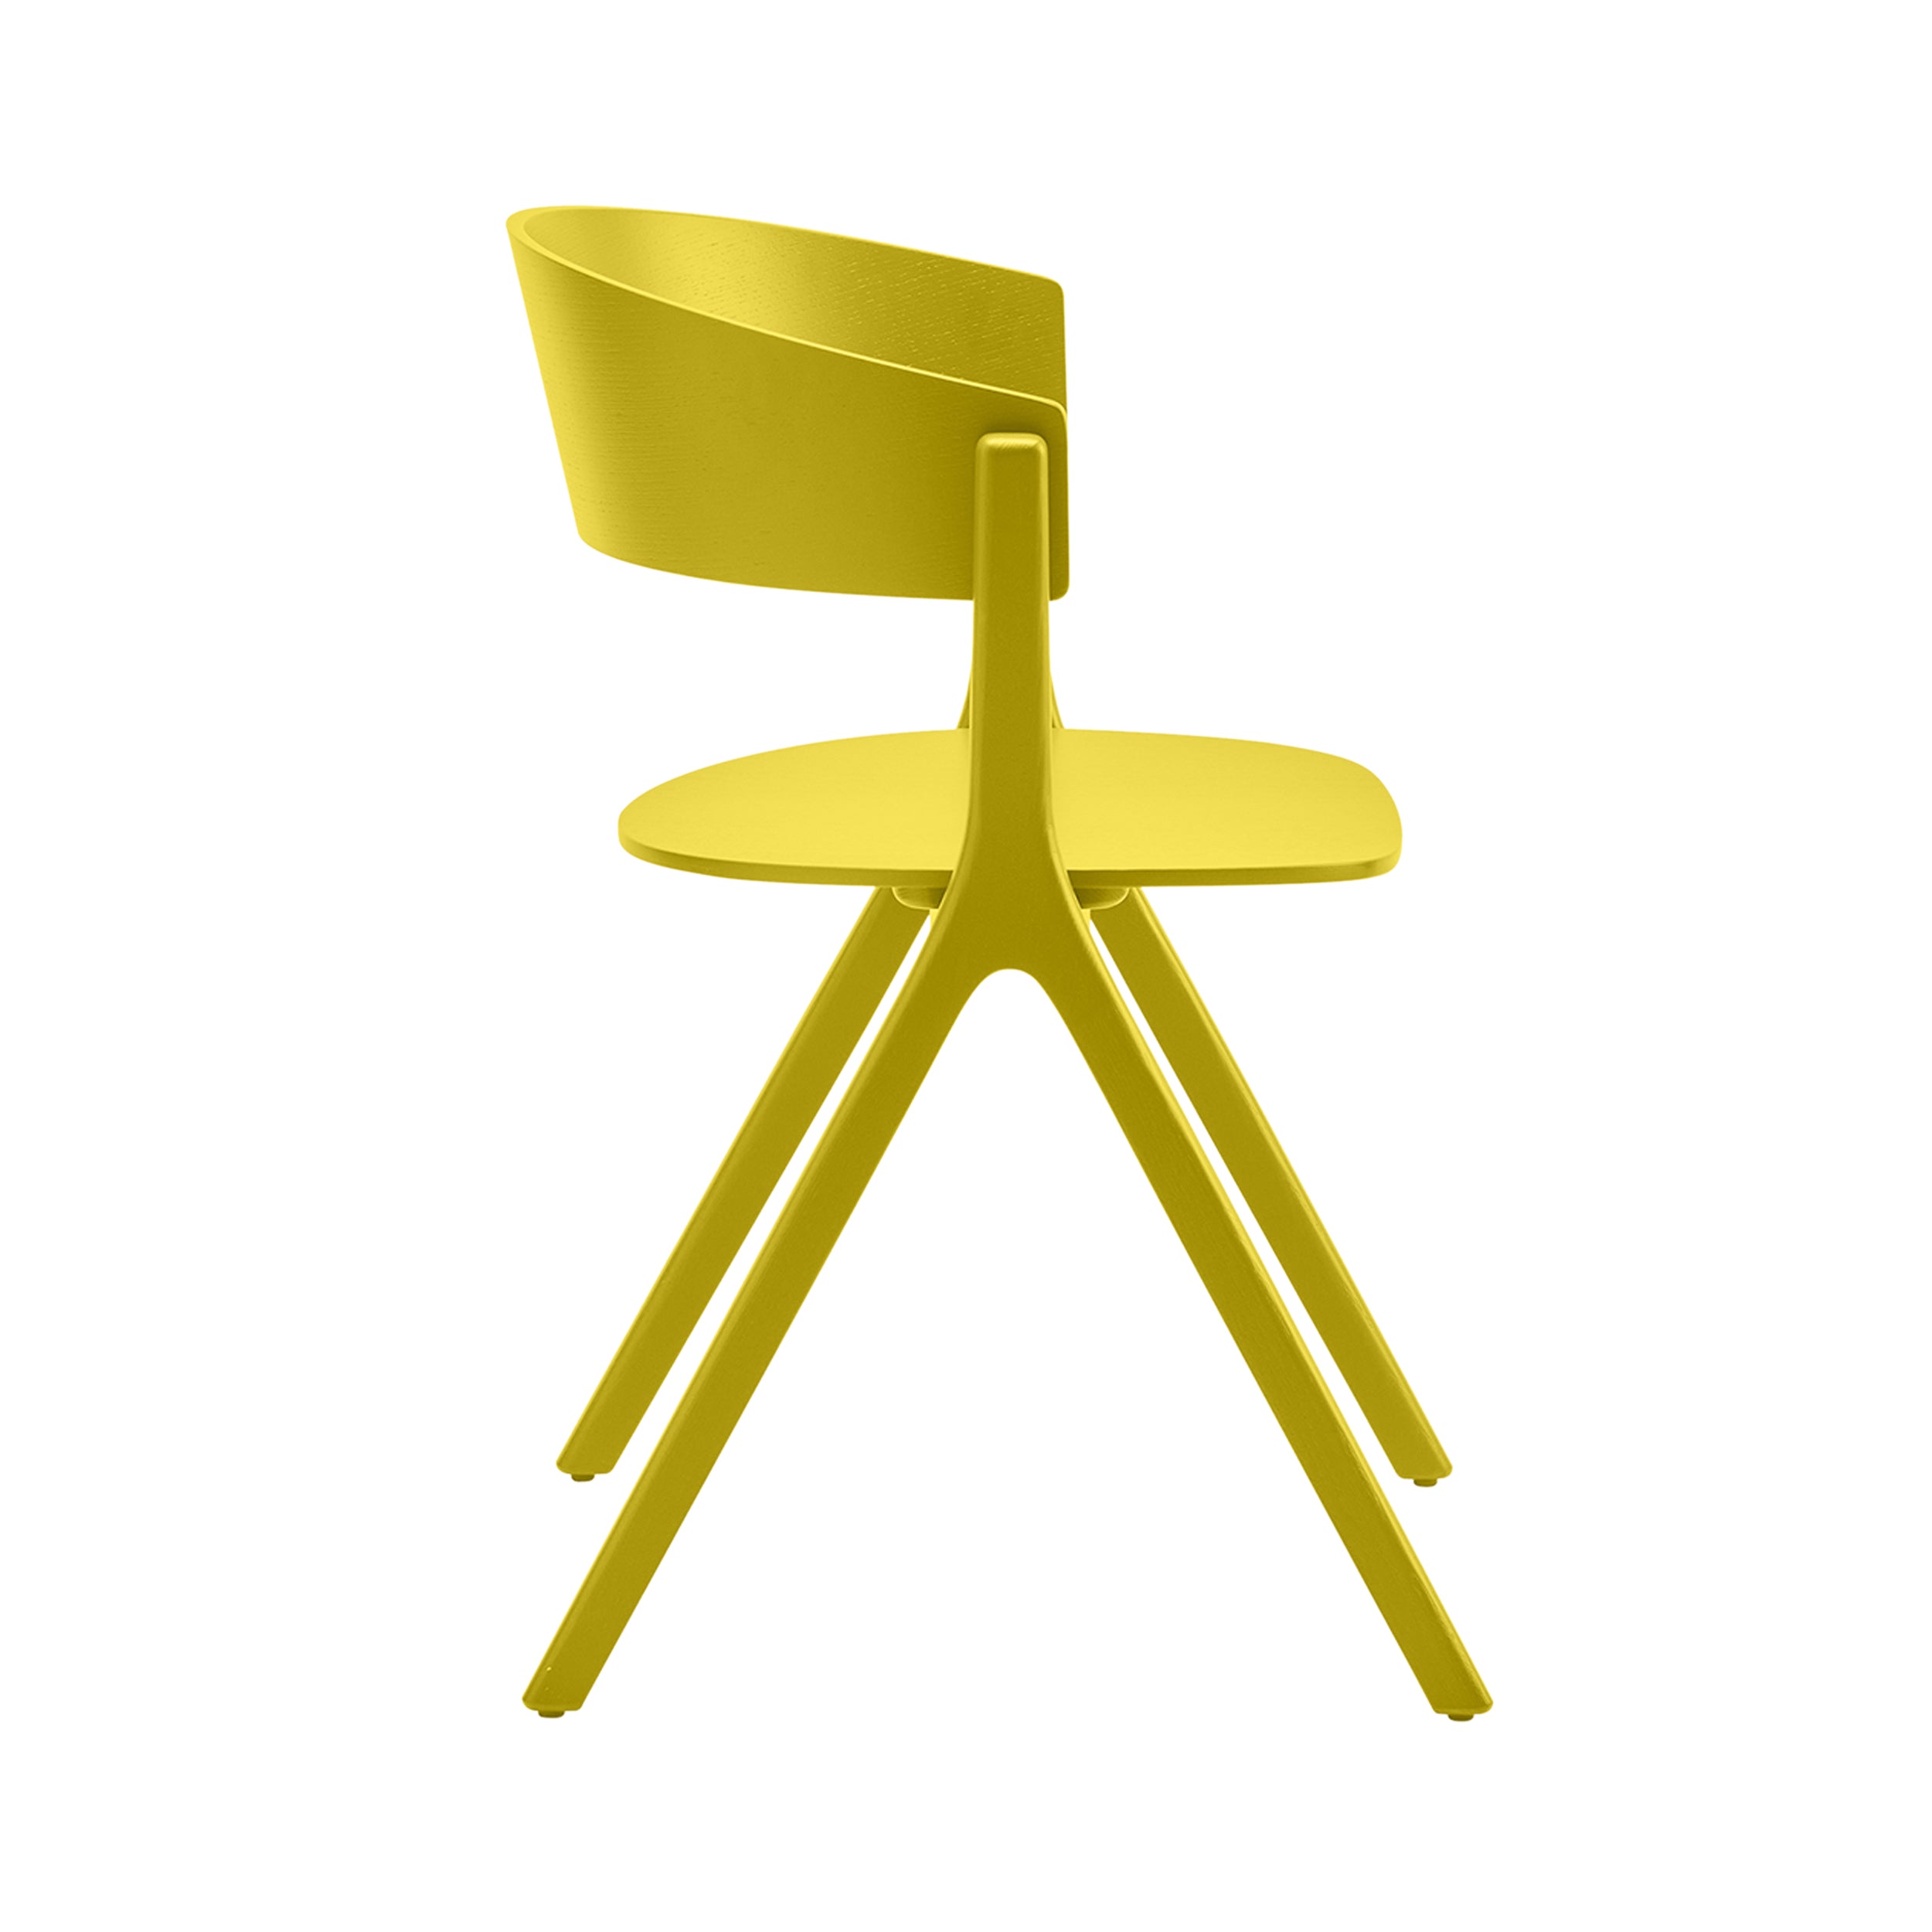 Circus Wood Chair: Lemon Yellow + Without Seat Pad